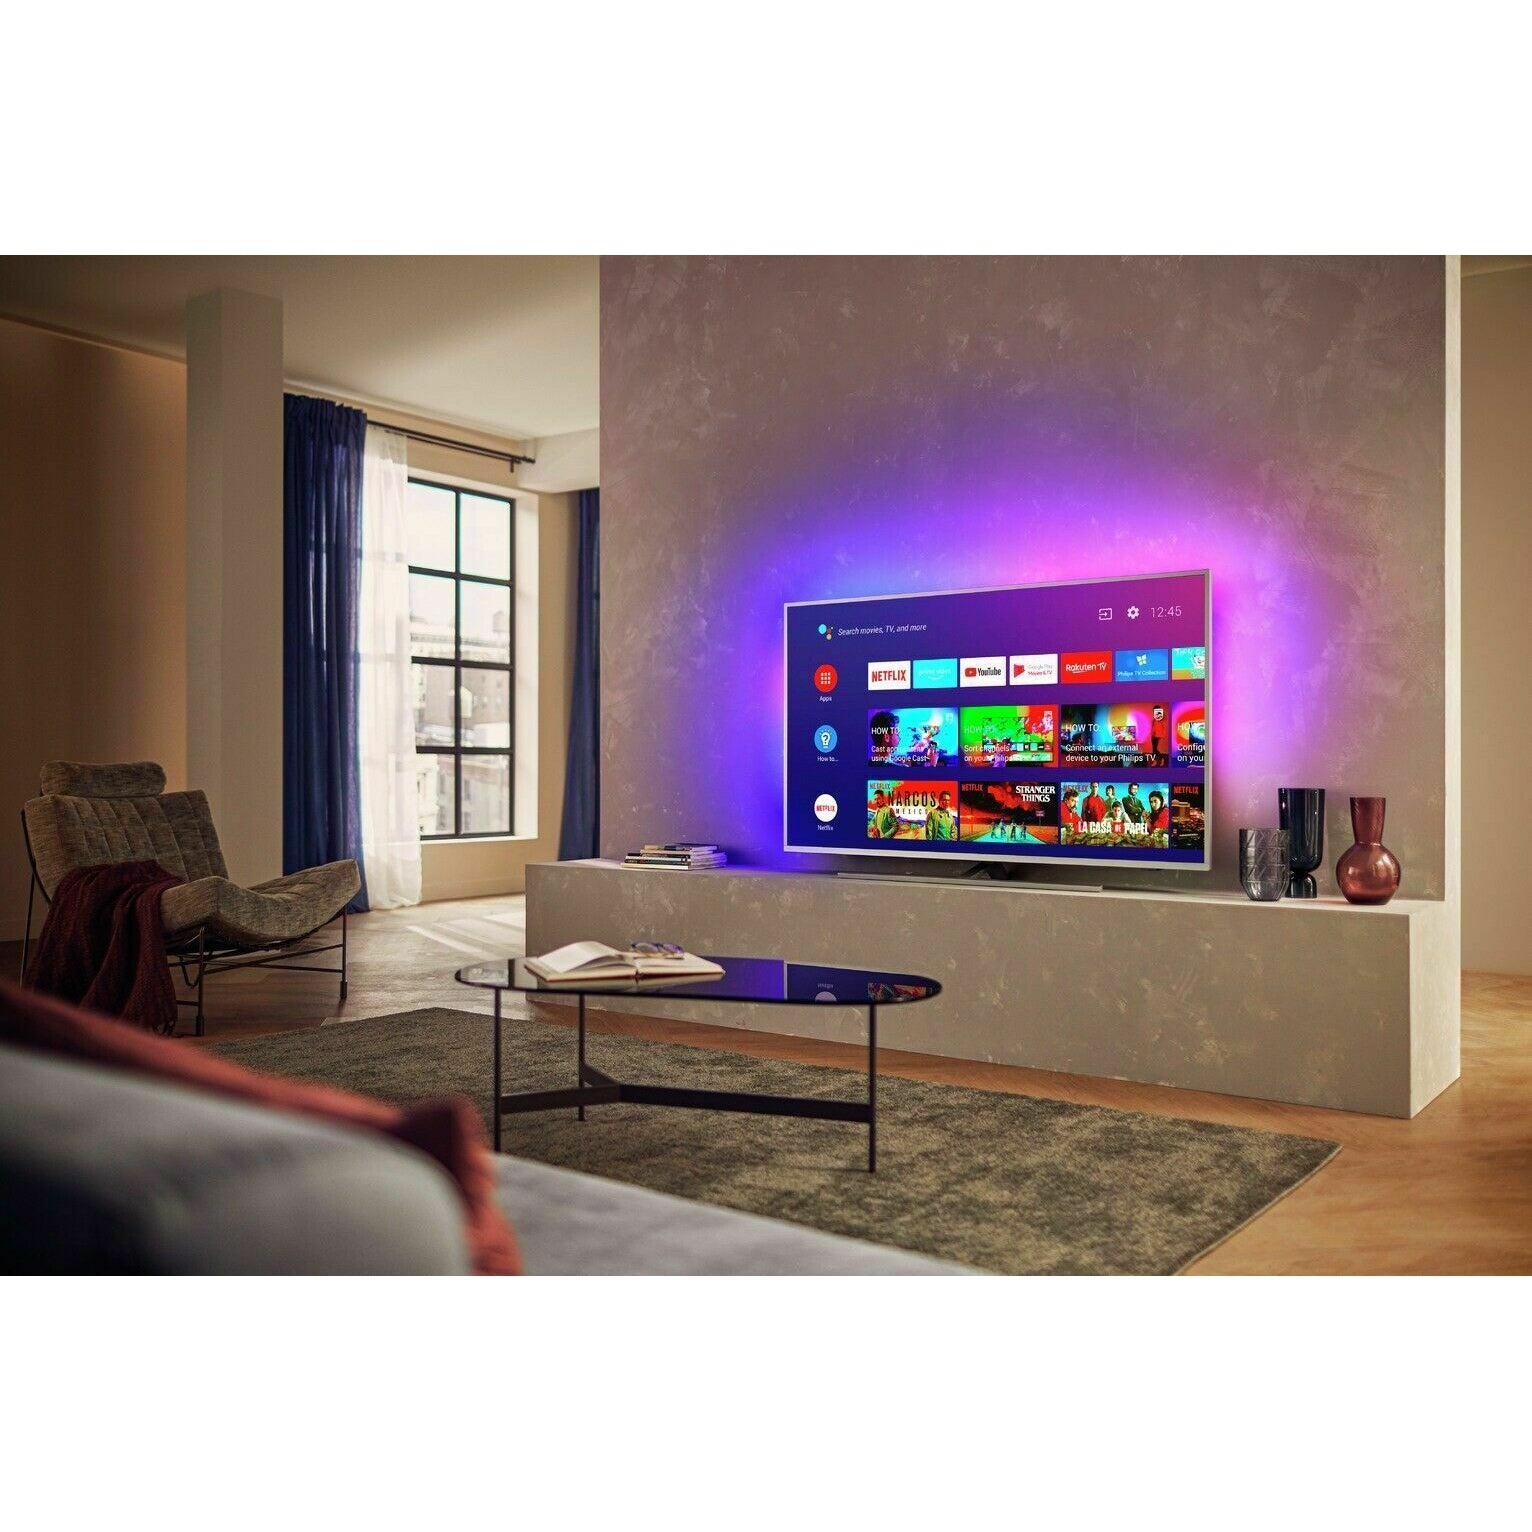 Refurbished Philips 50 Inch 50PUS8505 Smart 4K Ultra HD LED TV with HDR, UK